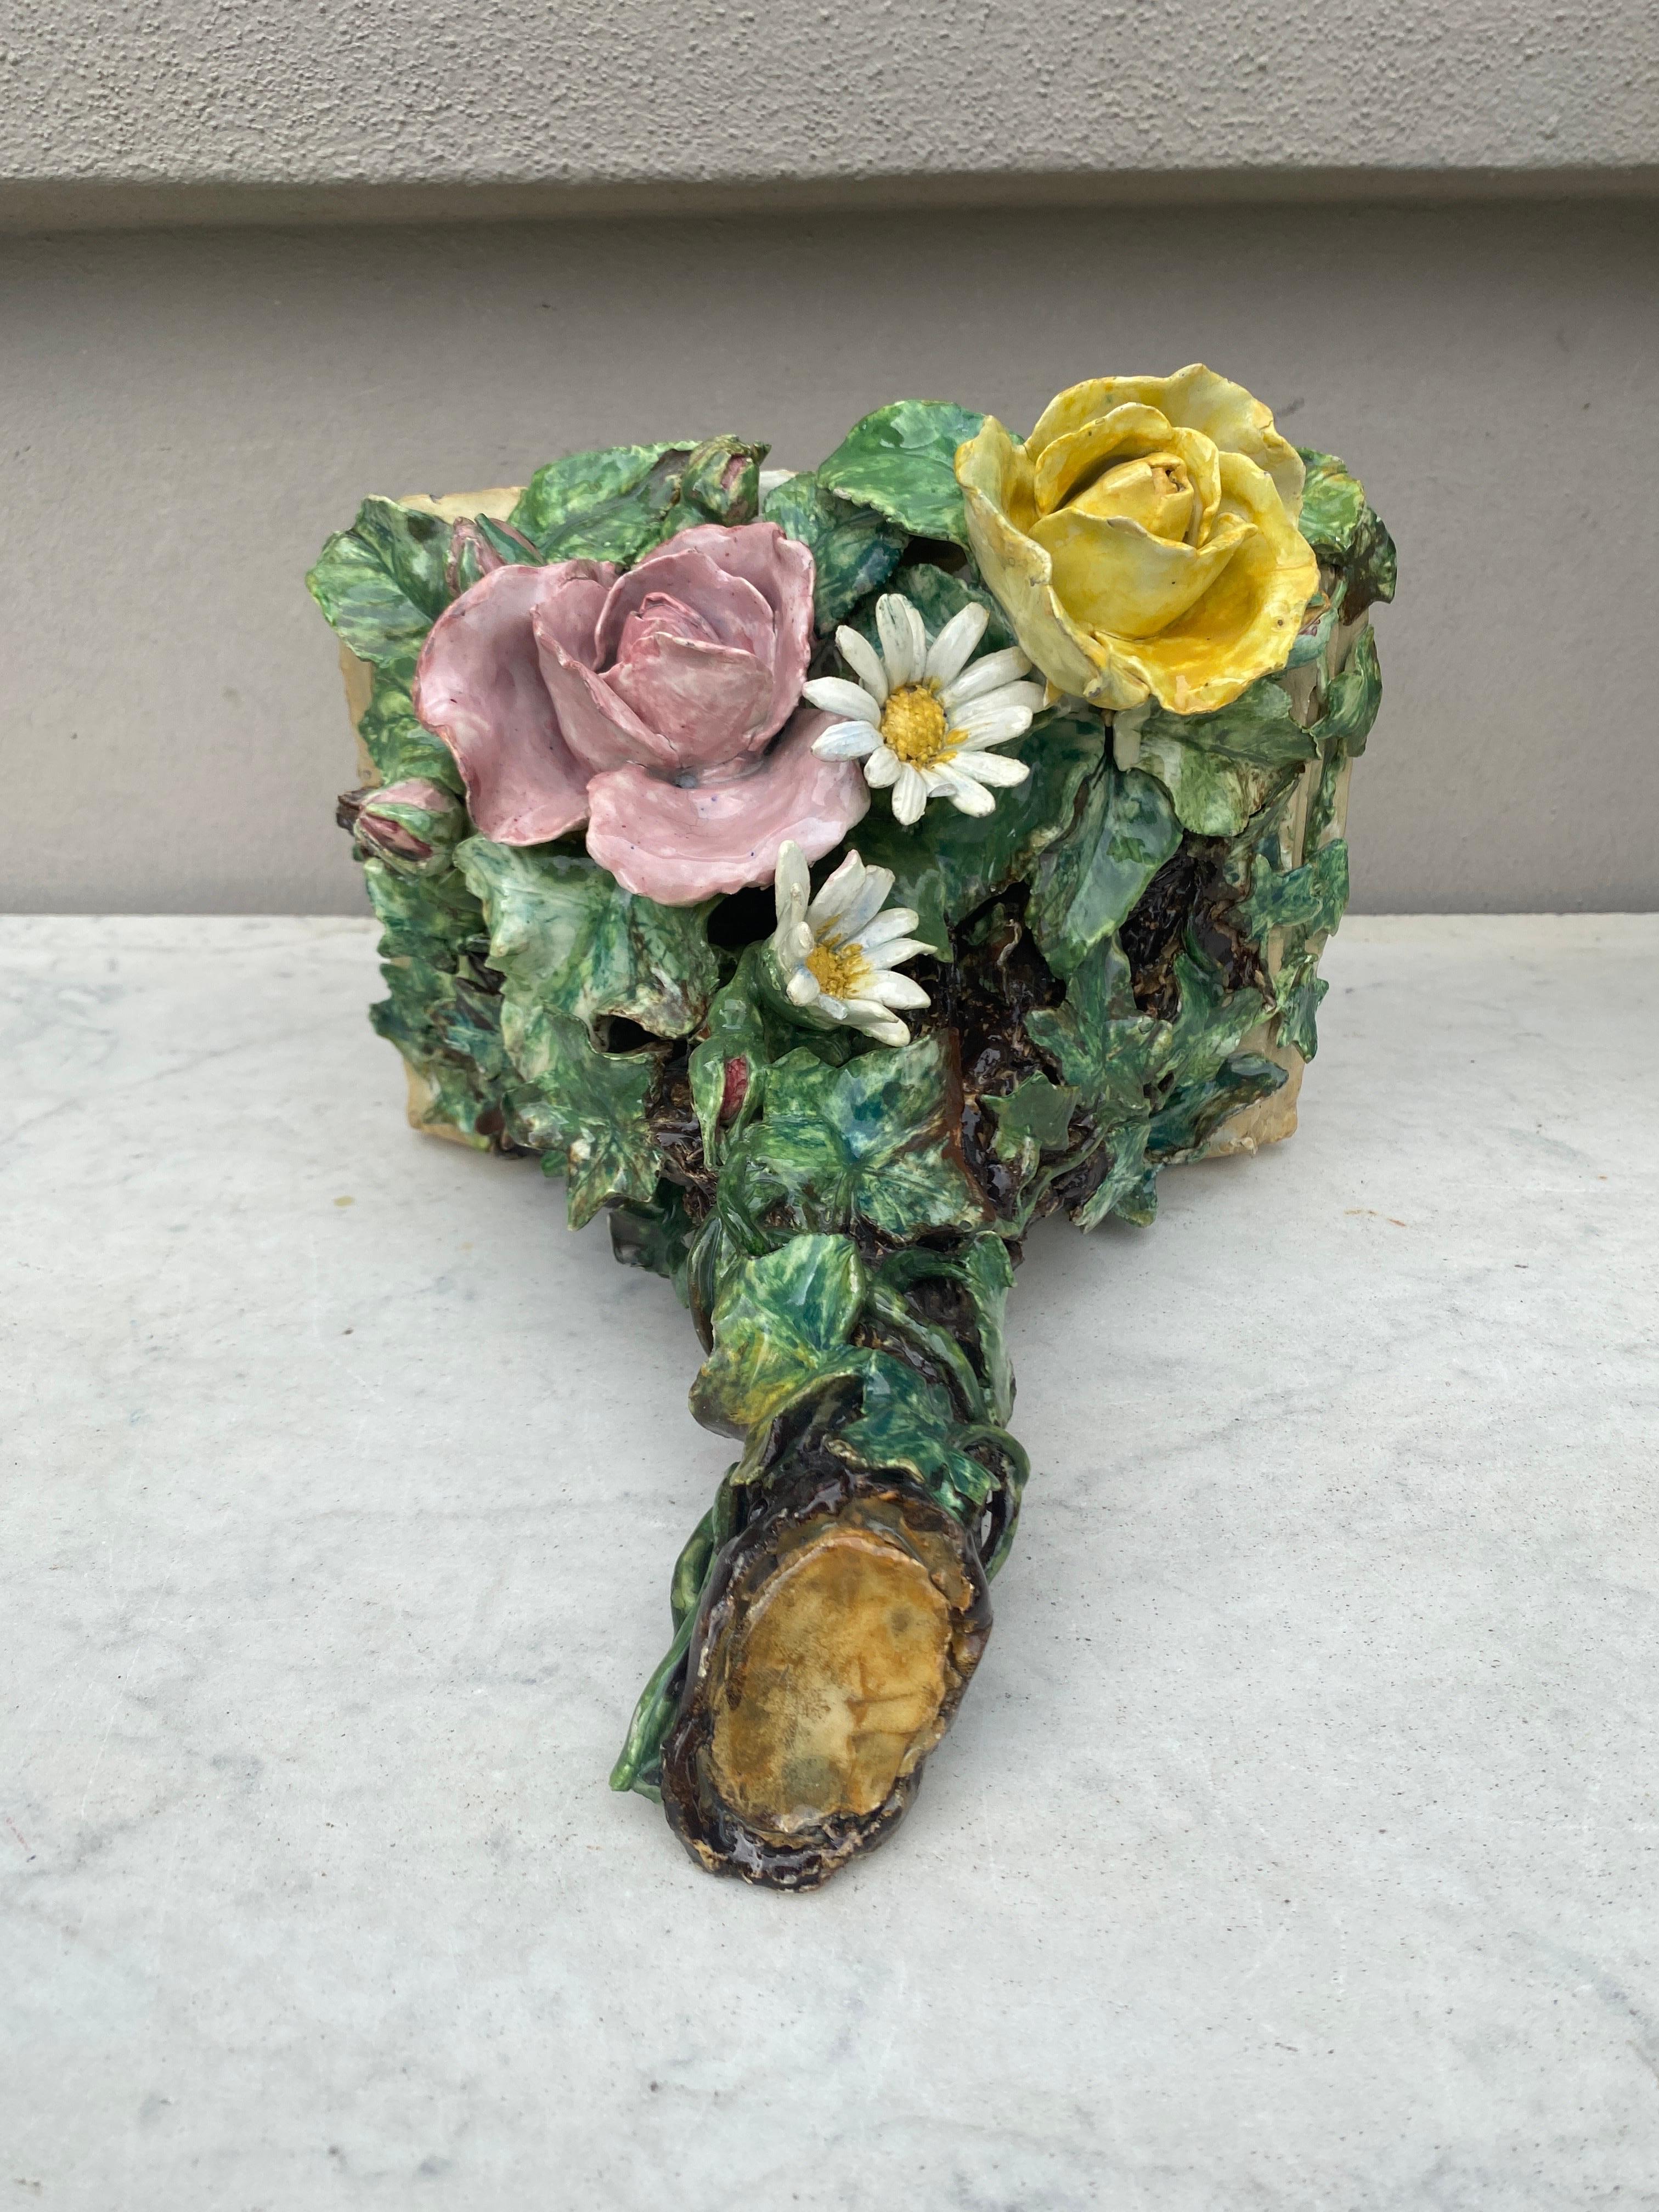 19th century French Majolica sconce with roses and daisies.